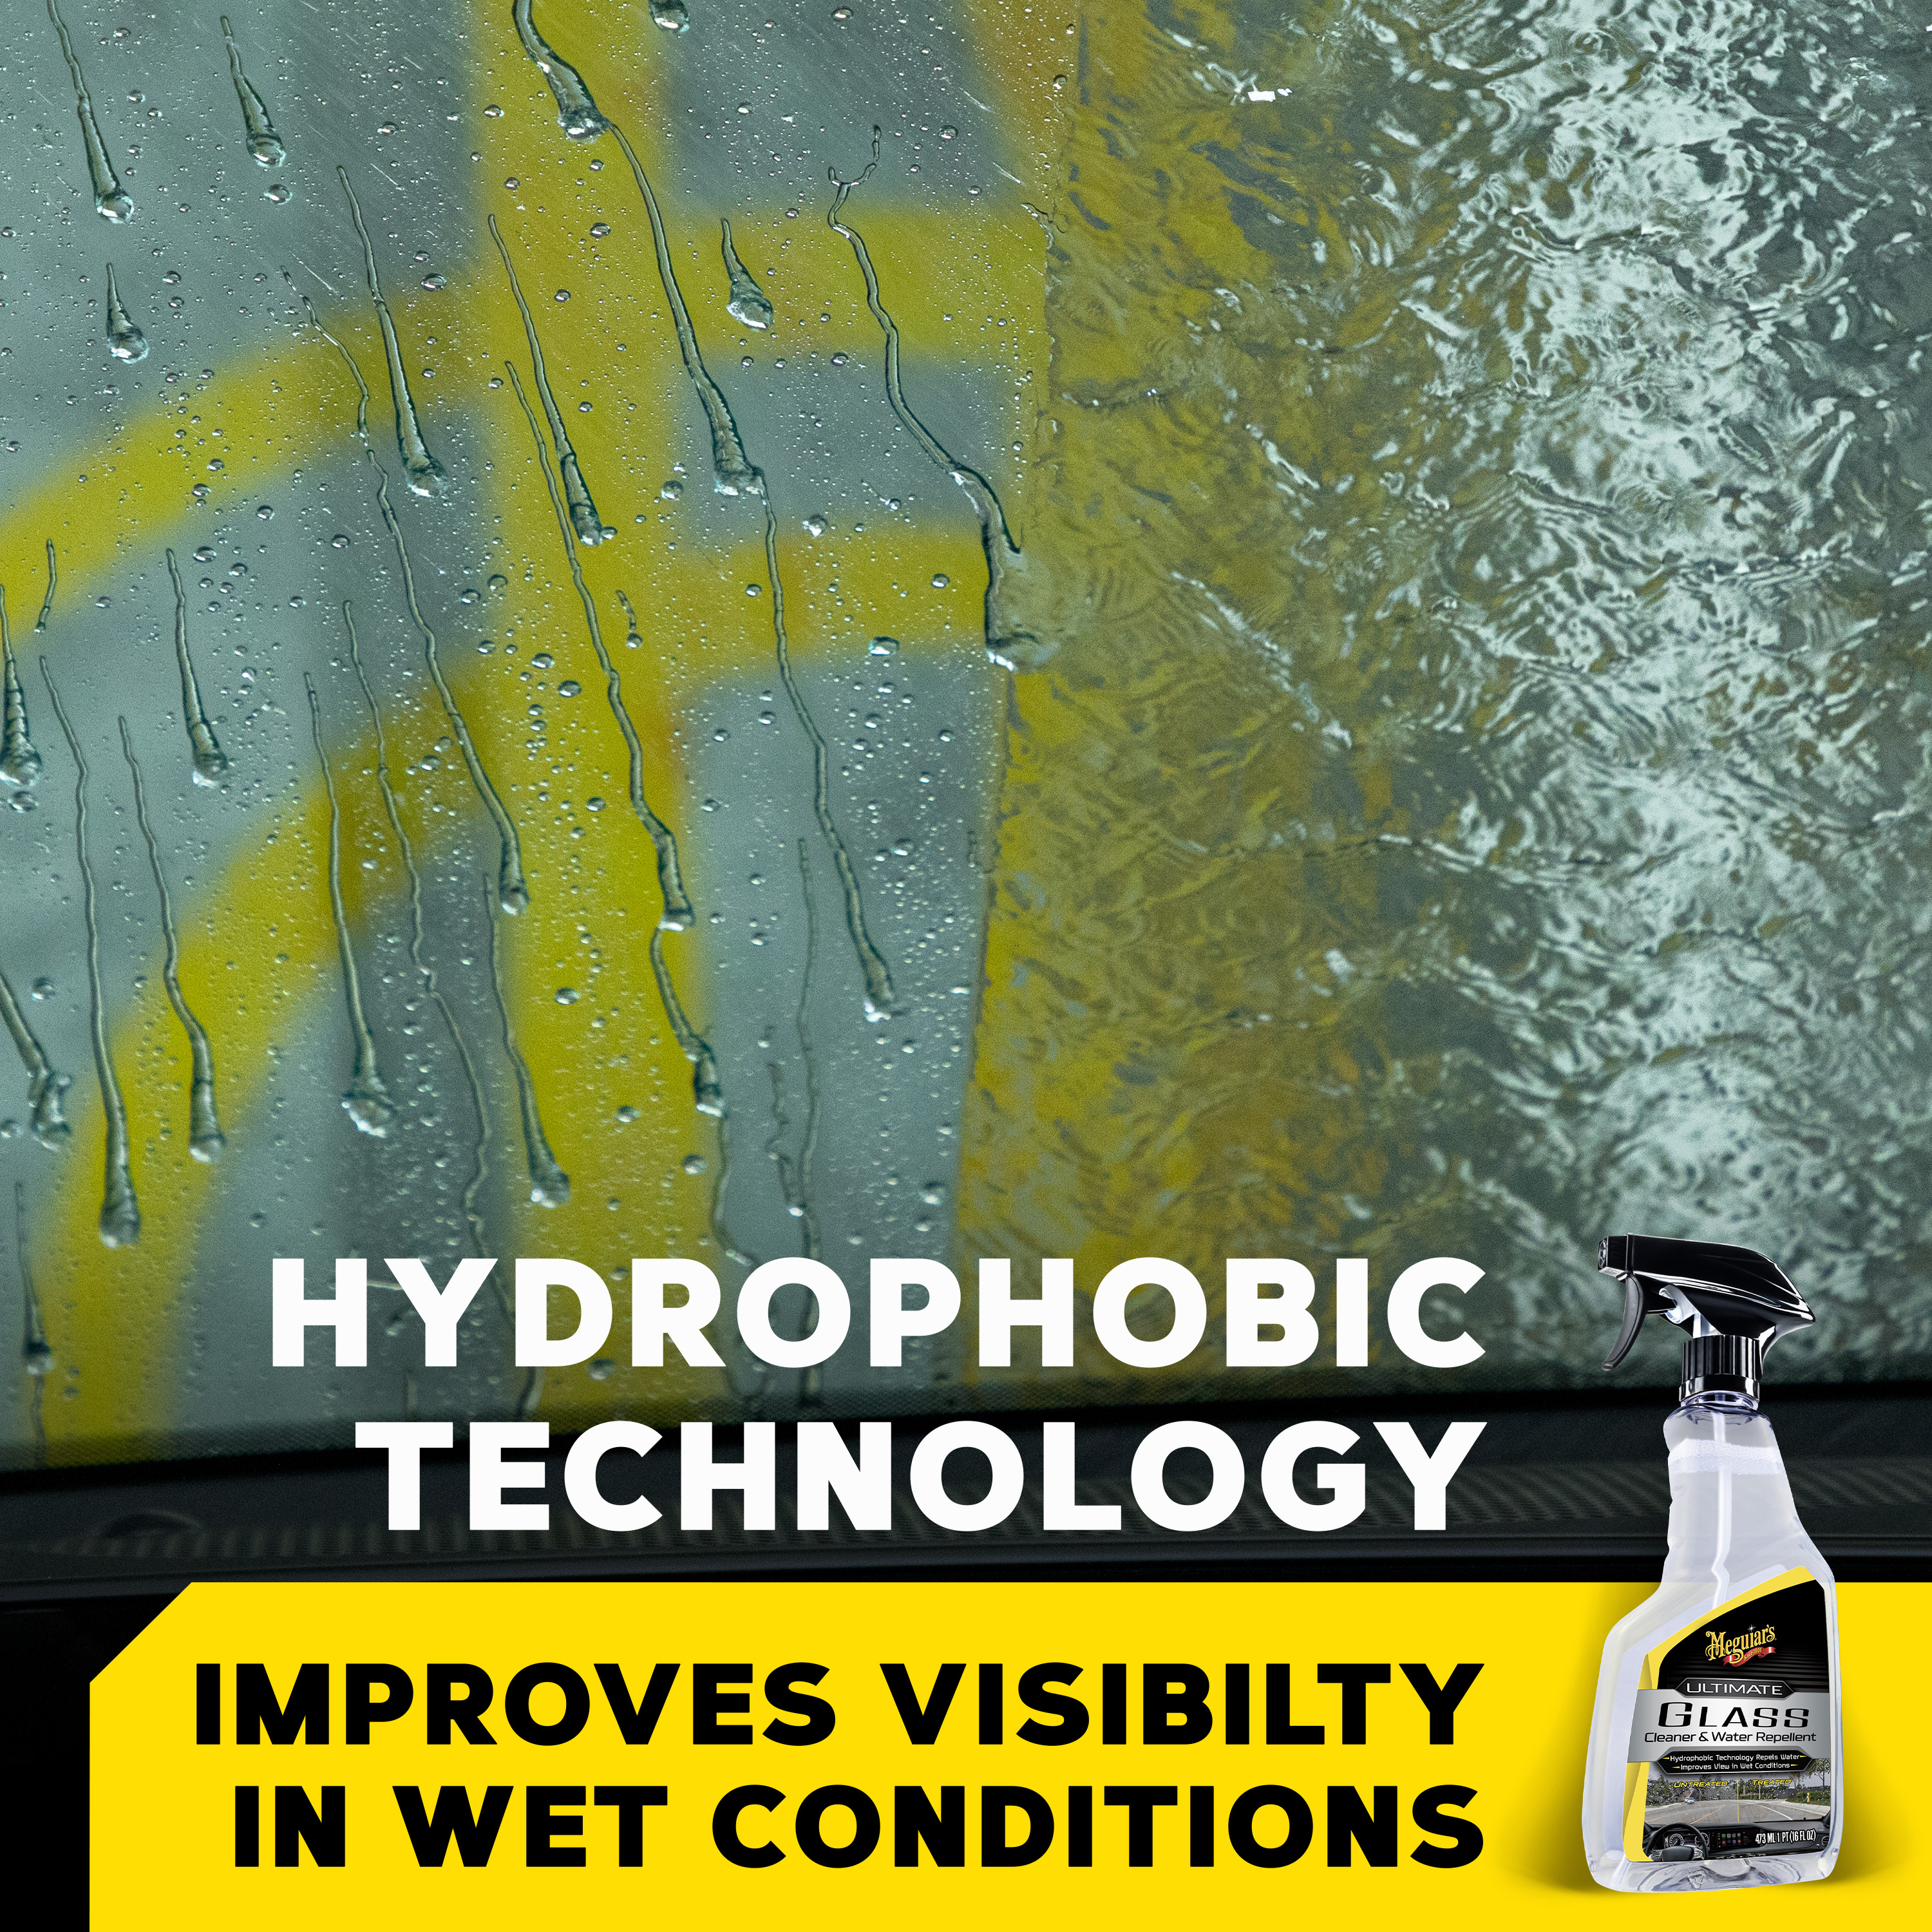  Meguiar's Ultimate Glass Cleaner & Water Repellent - Premium  Glass and Window Cleaner for Quick Cleaning with Hydrophobic Technology  that Acts as a Rain Repellent Improving Visibility in Rain - 16oz 